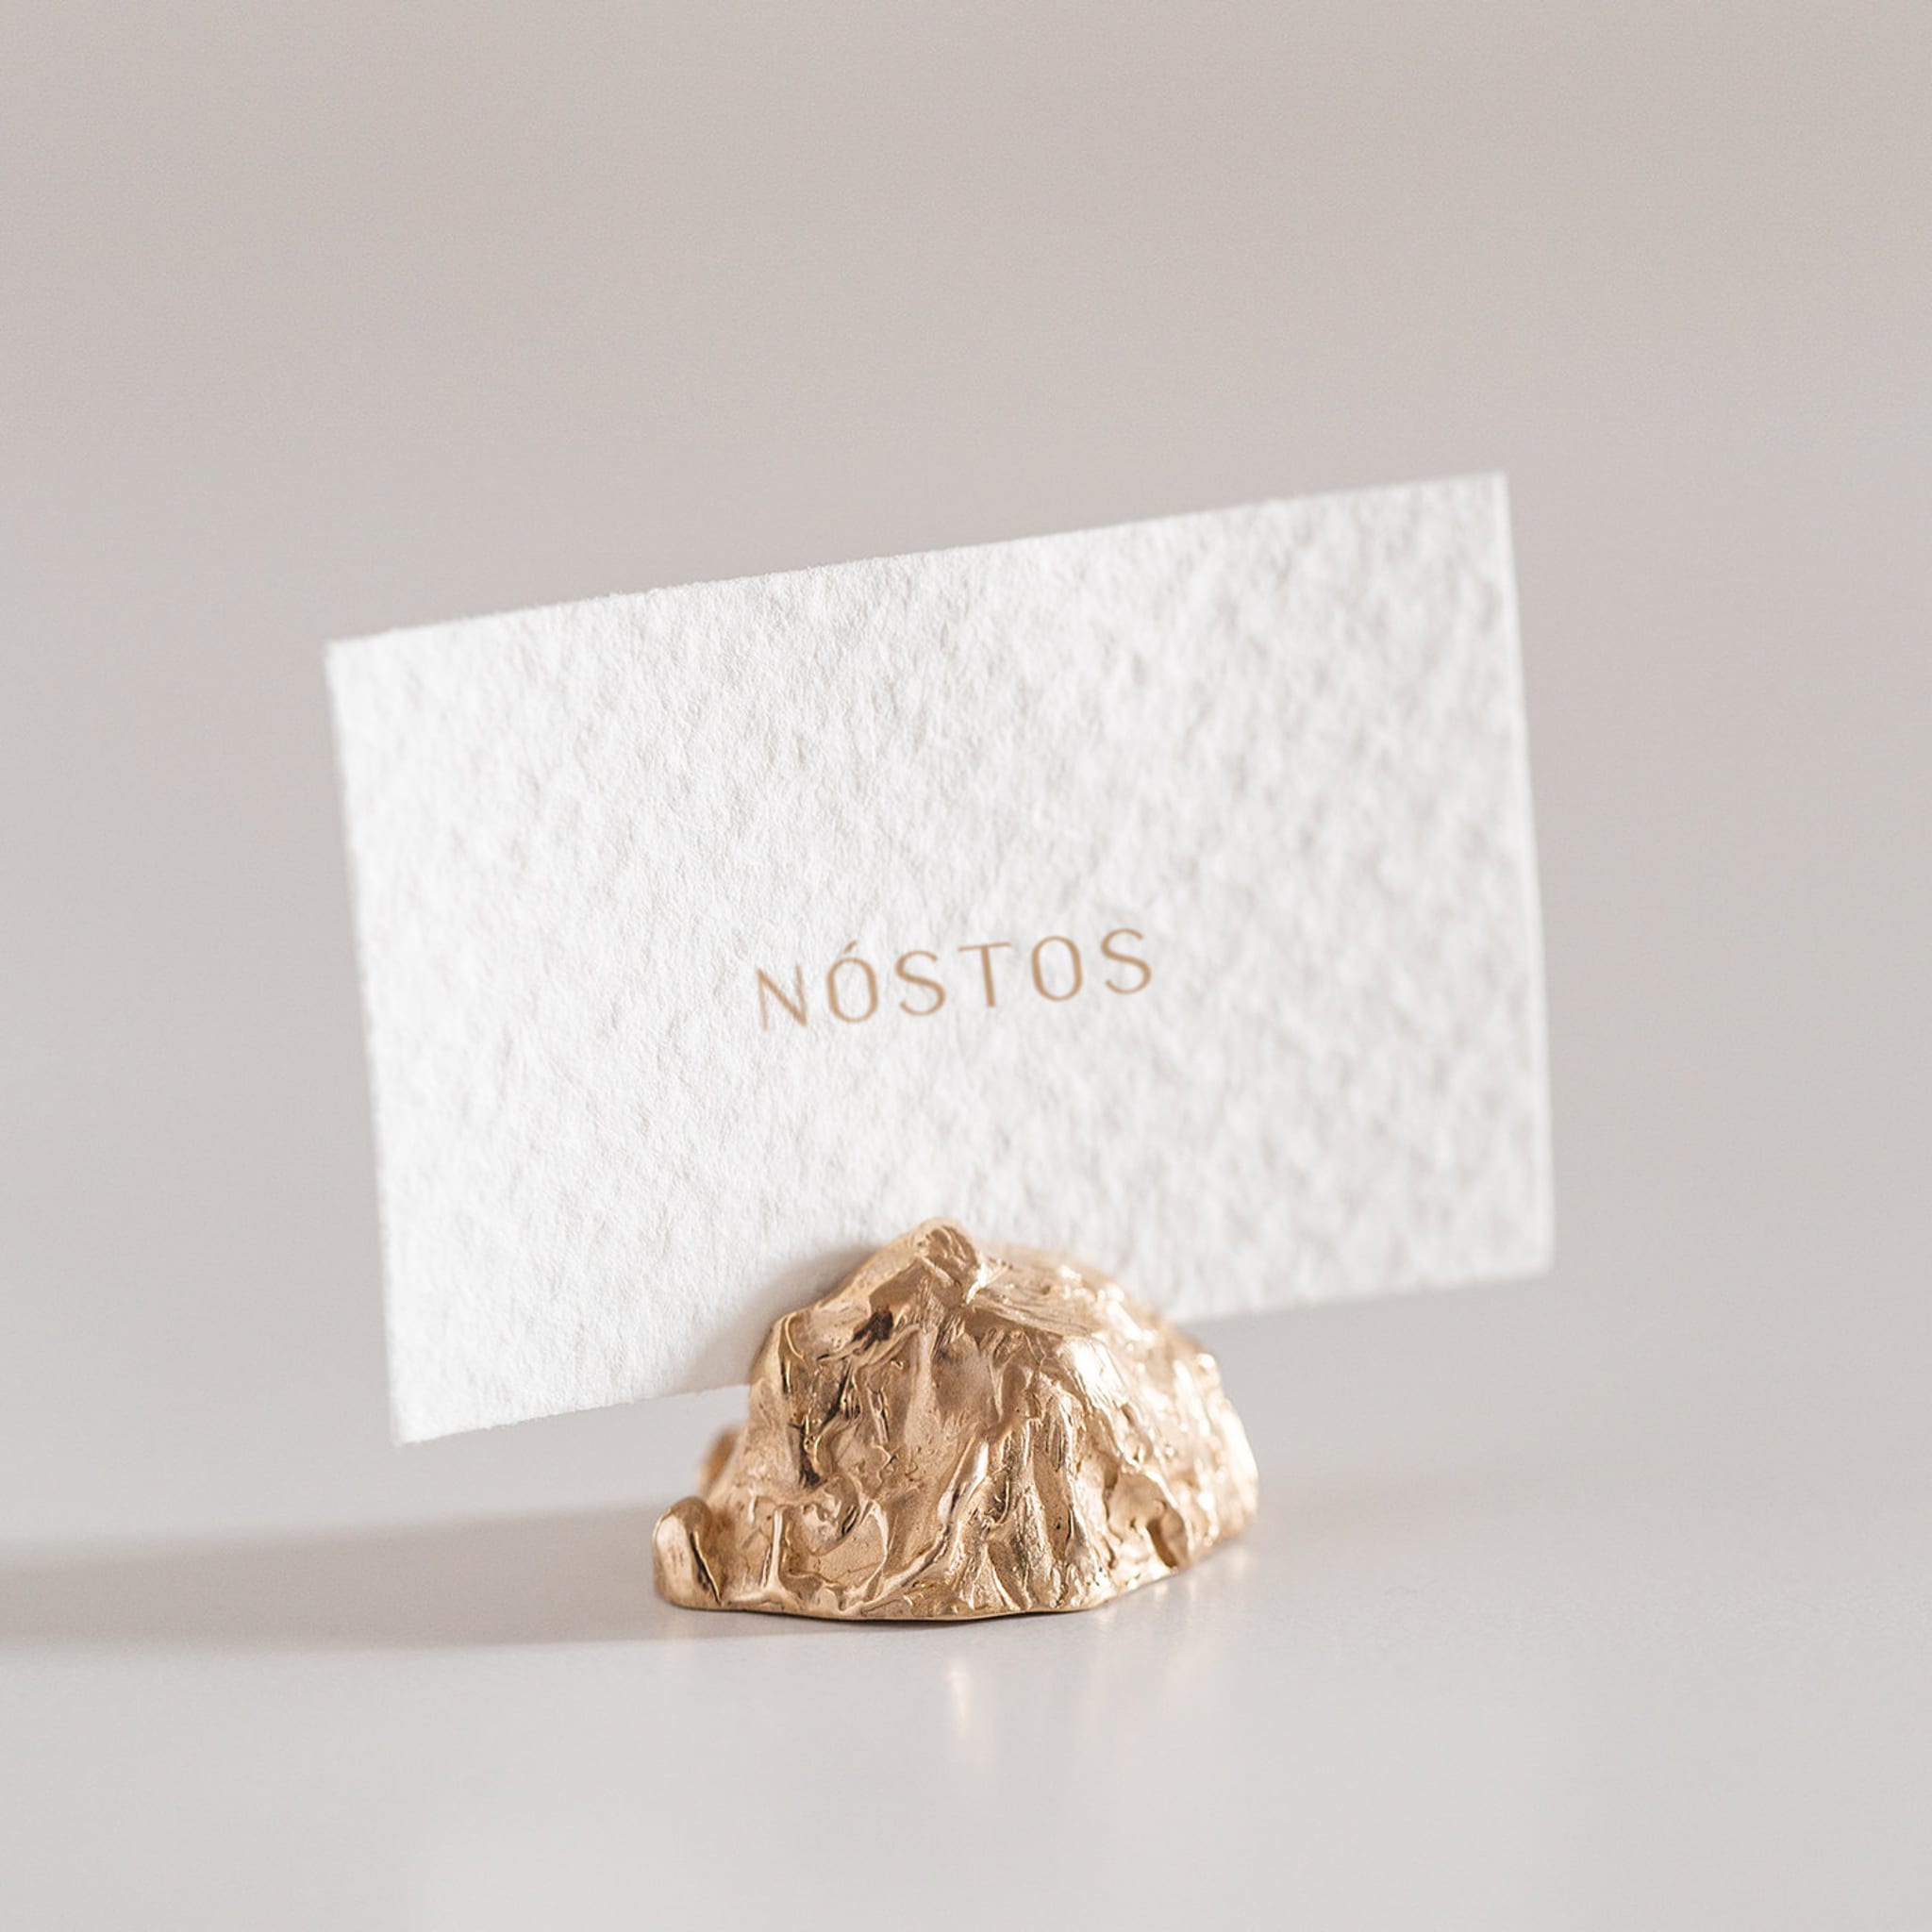 Nóstos Set of 2 Placeholders by Devi Petti  - Alternative view 1